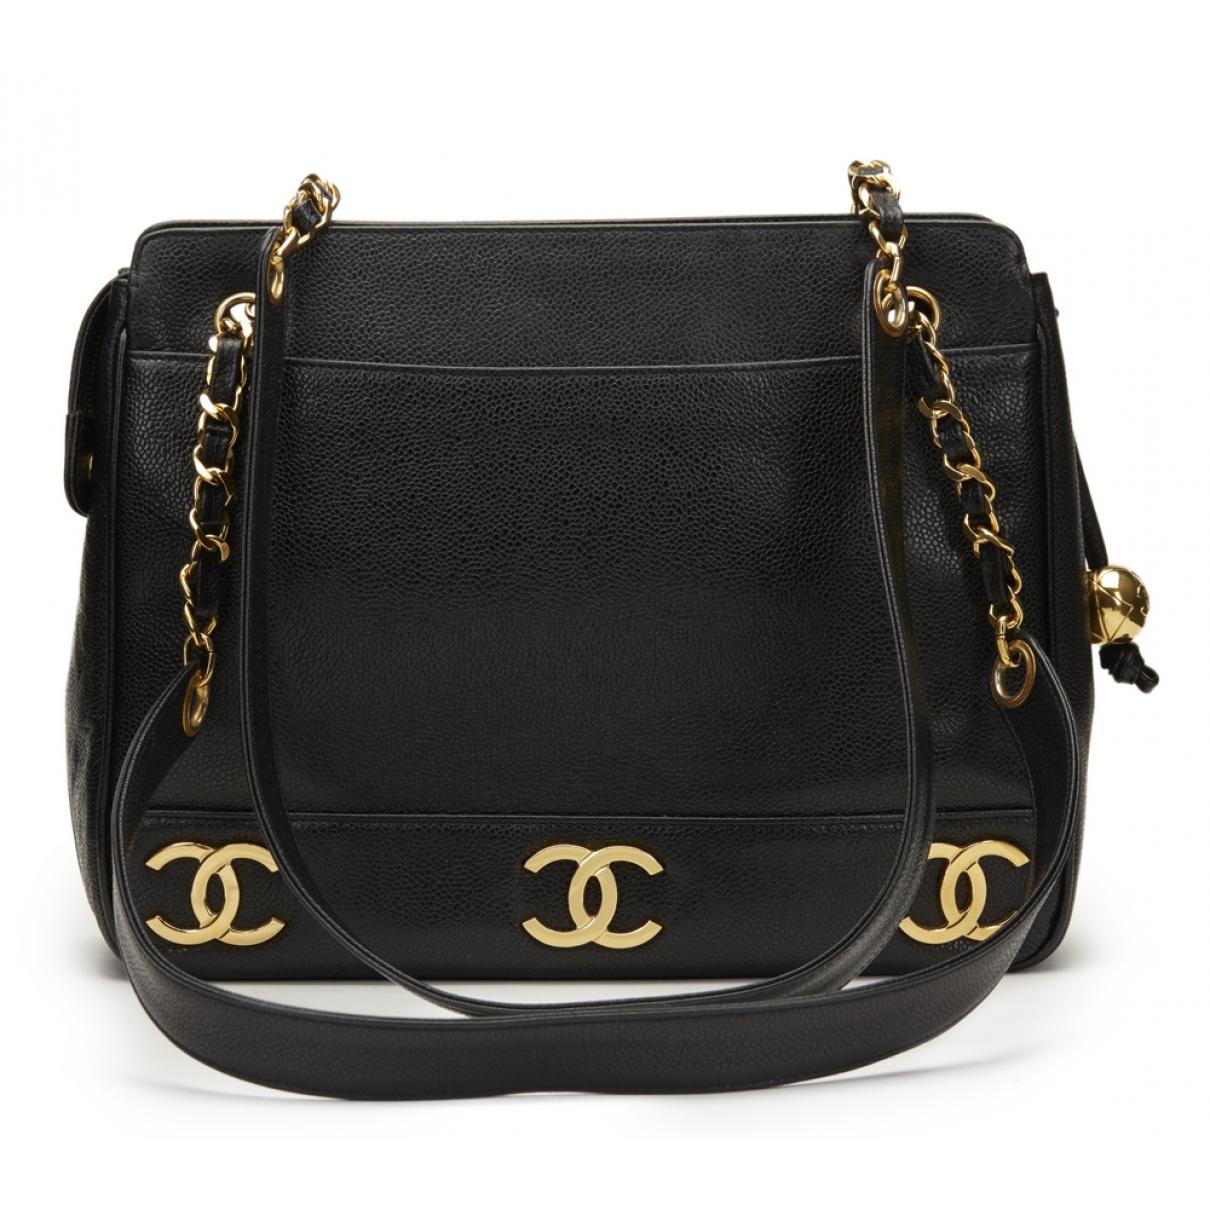 Chanel Handbag Classic Black | Stanford Center for Opportunity Policy